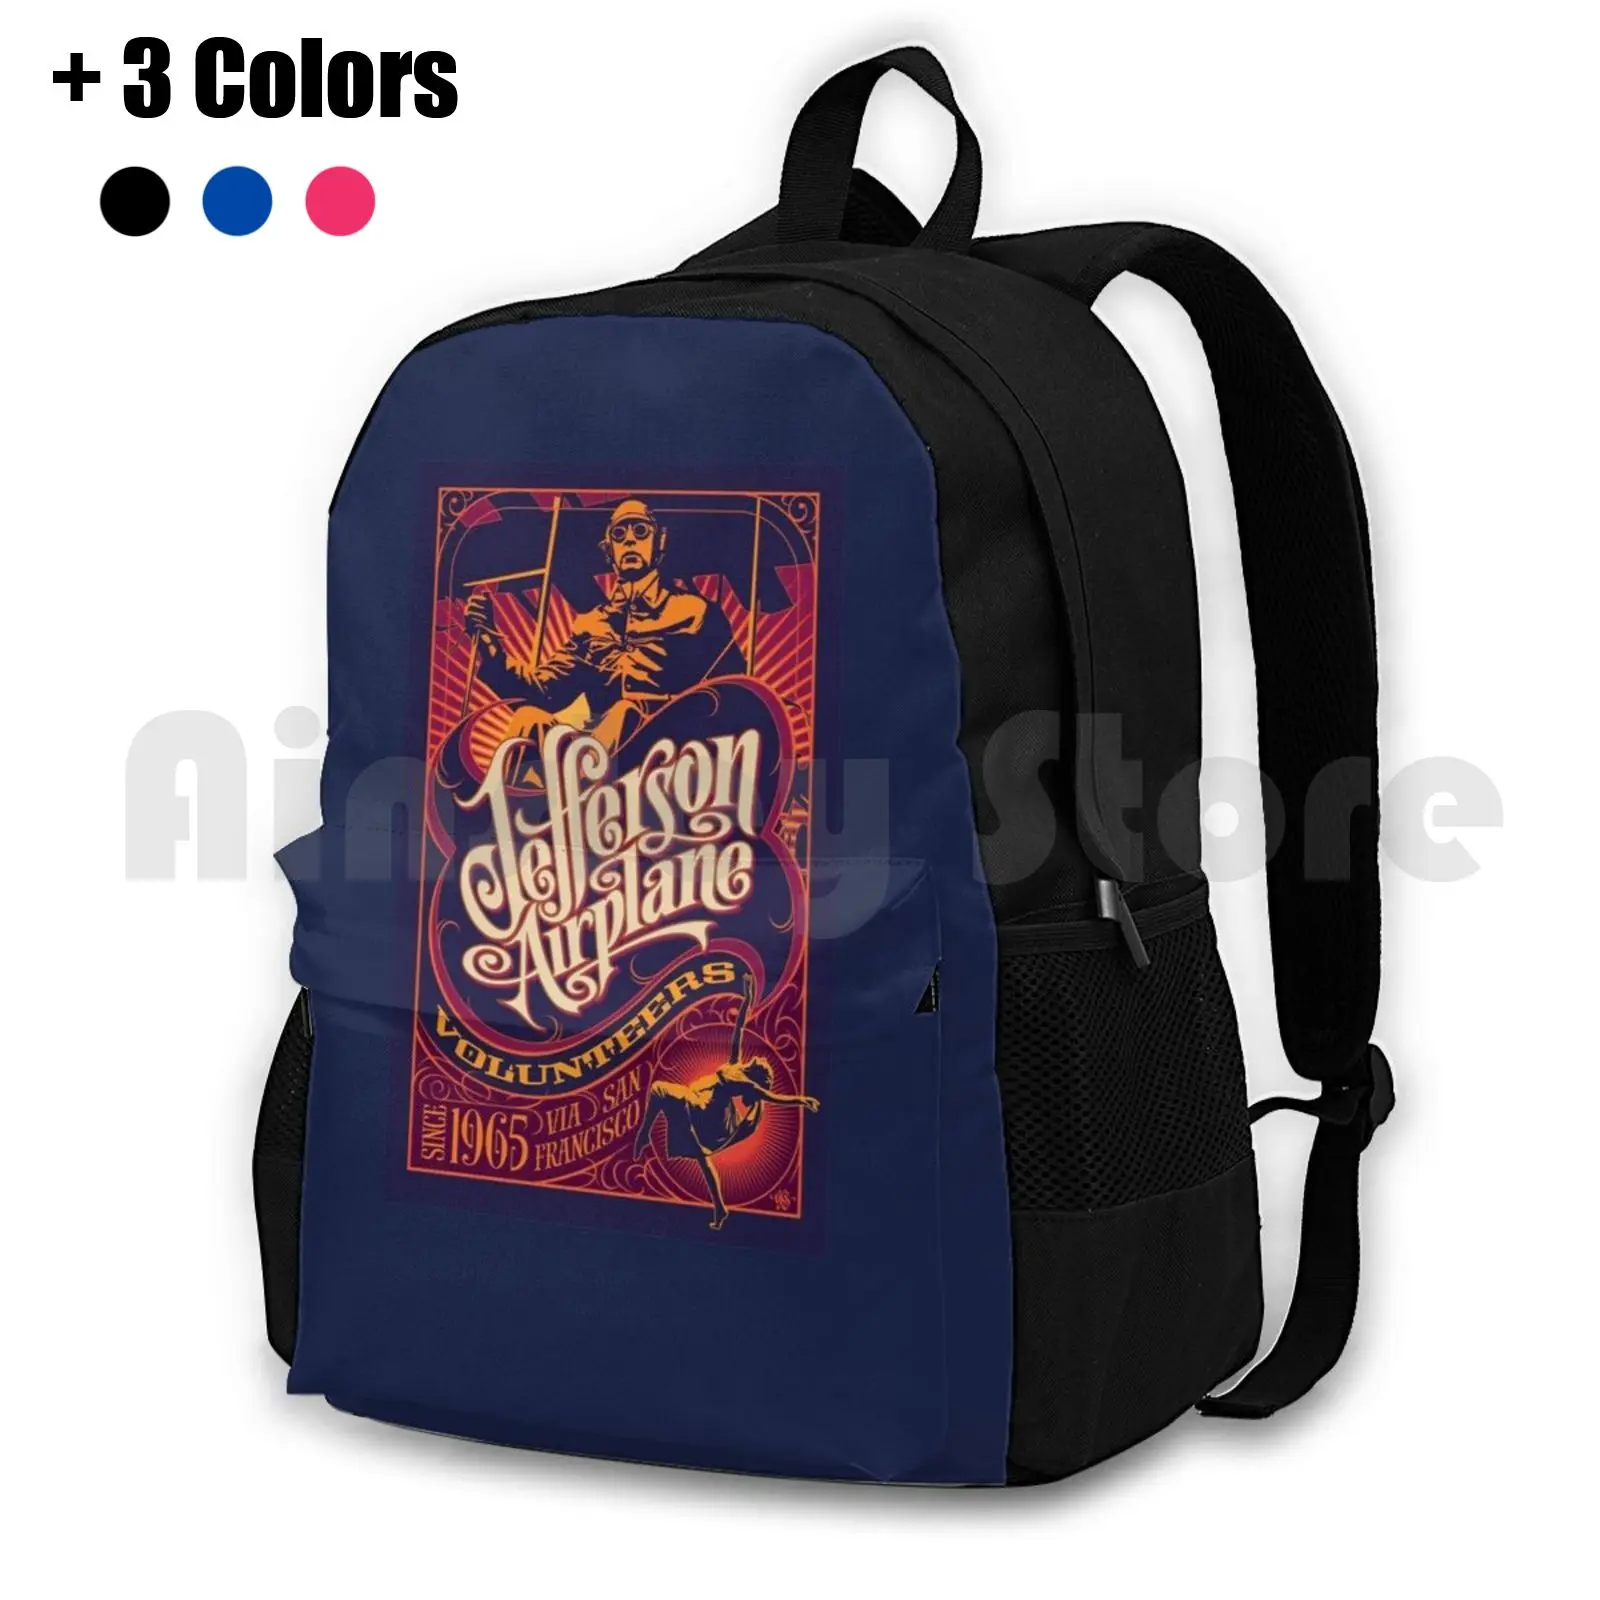 

Jefferson Airplane Outdoor Hiking Backpack Riding Climbing Sports Bag Music Psychedelic Roll Hippie San Francisco Haight